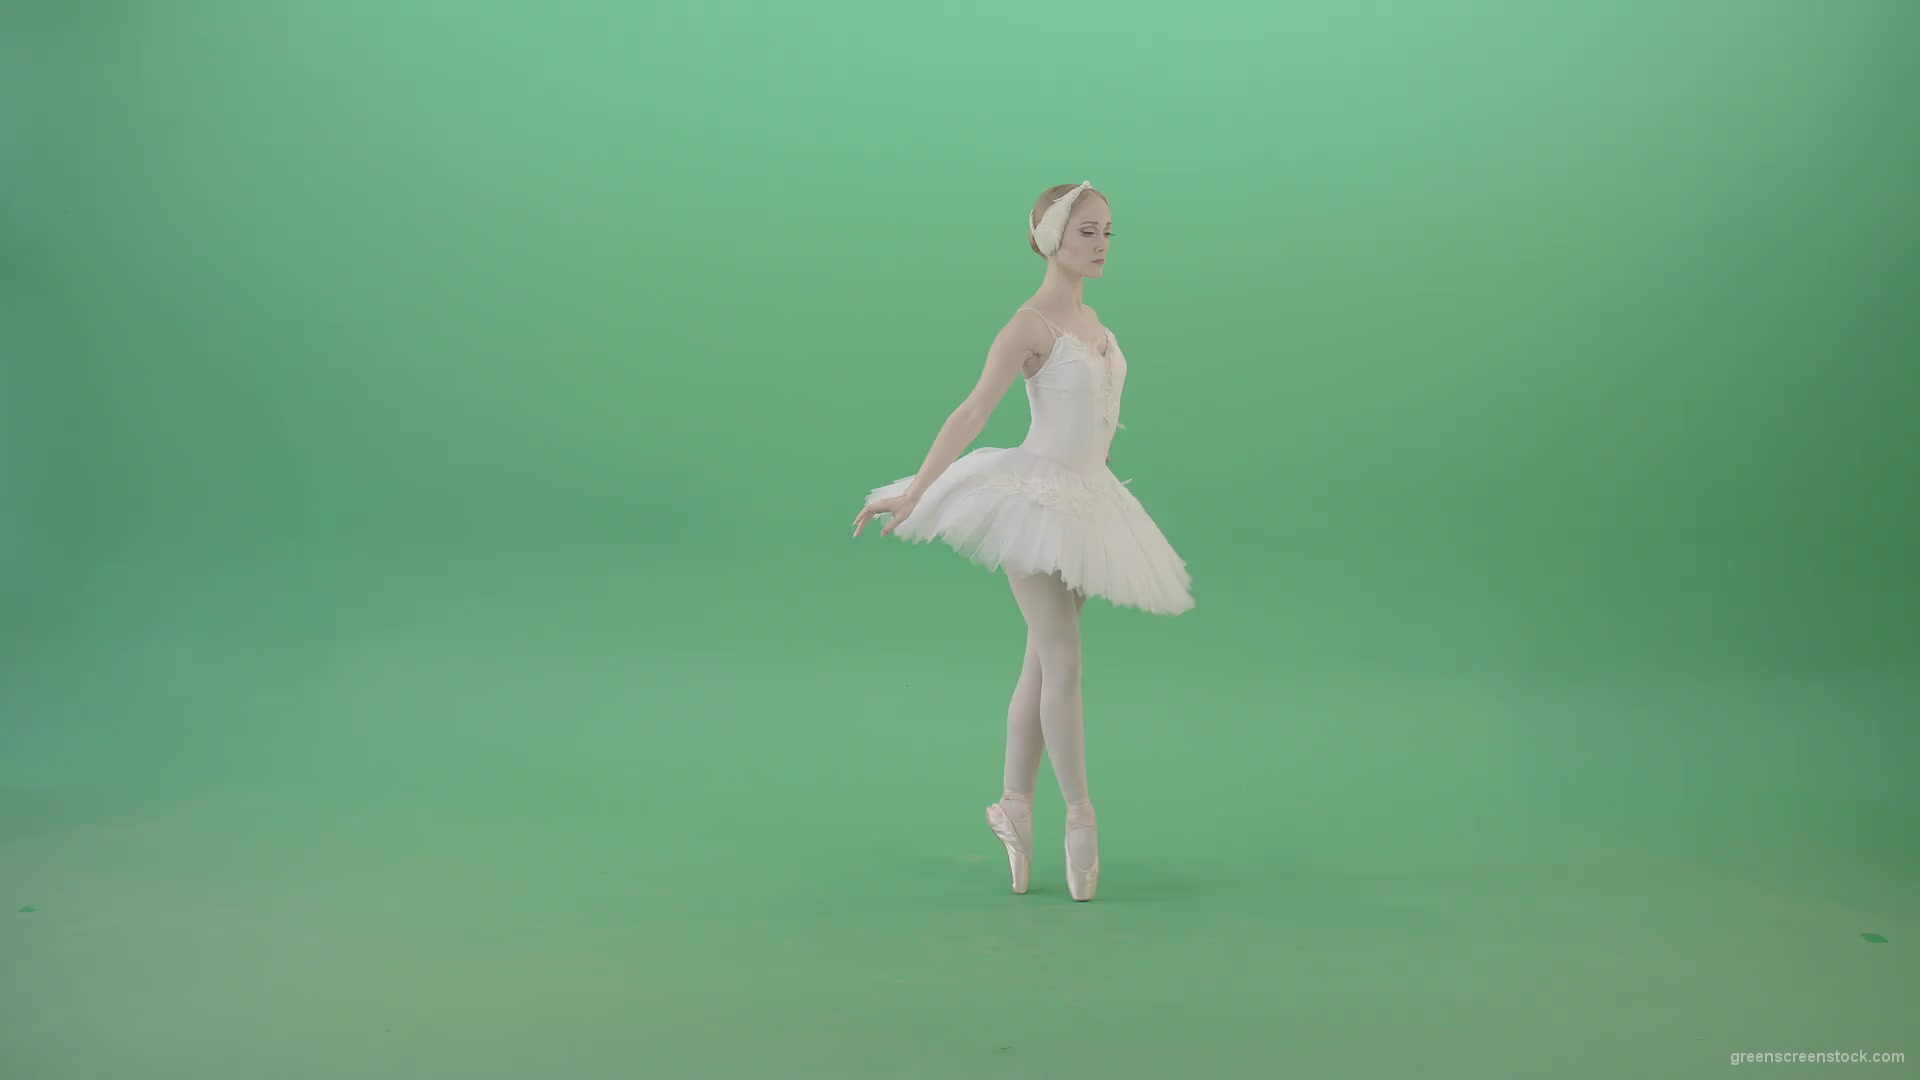 Luxury-ballet-girl-ballerina-flying-in-the-sky-and-waving-hands-on-green-screen-4K-Video-Footage-1920_001 Green Screen Stock